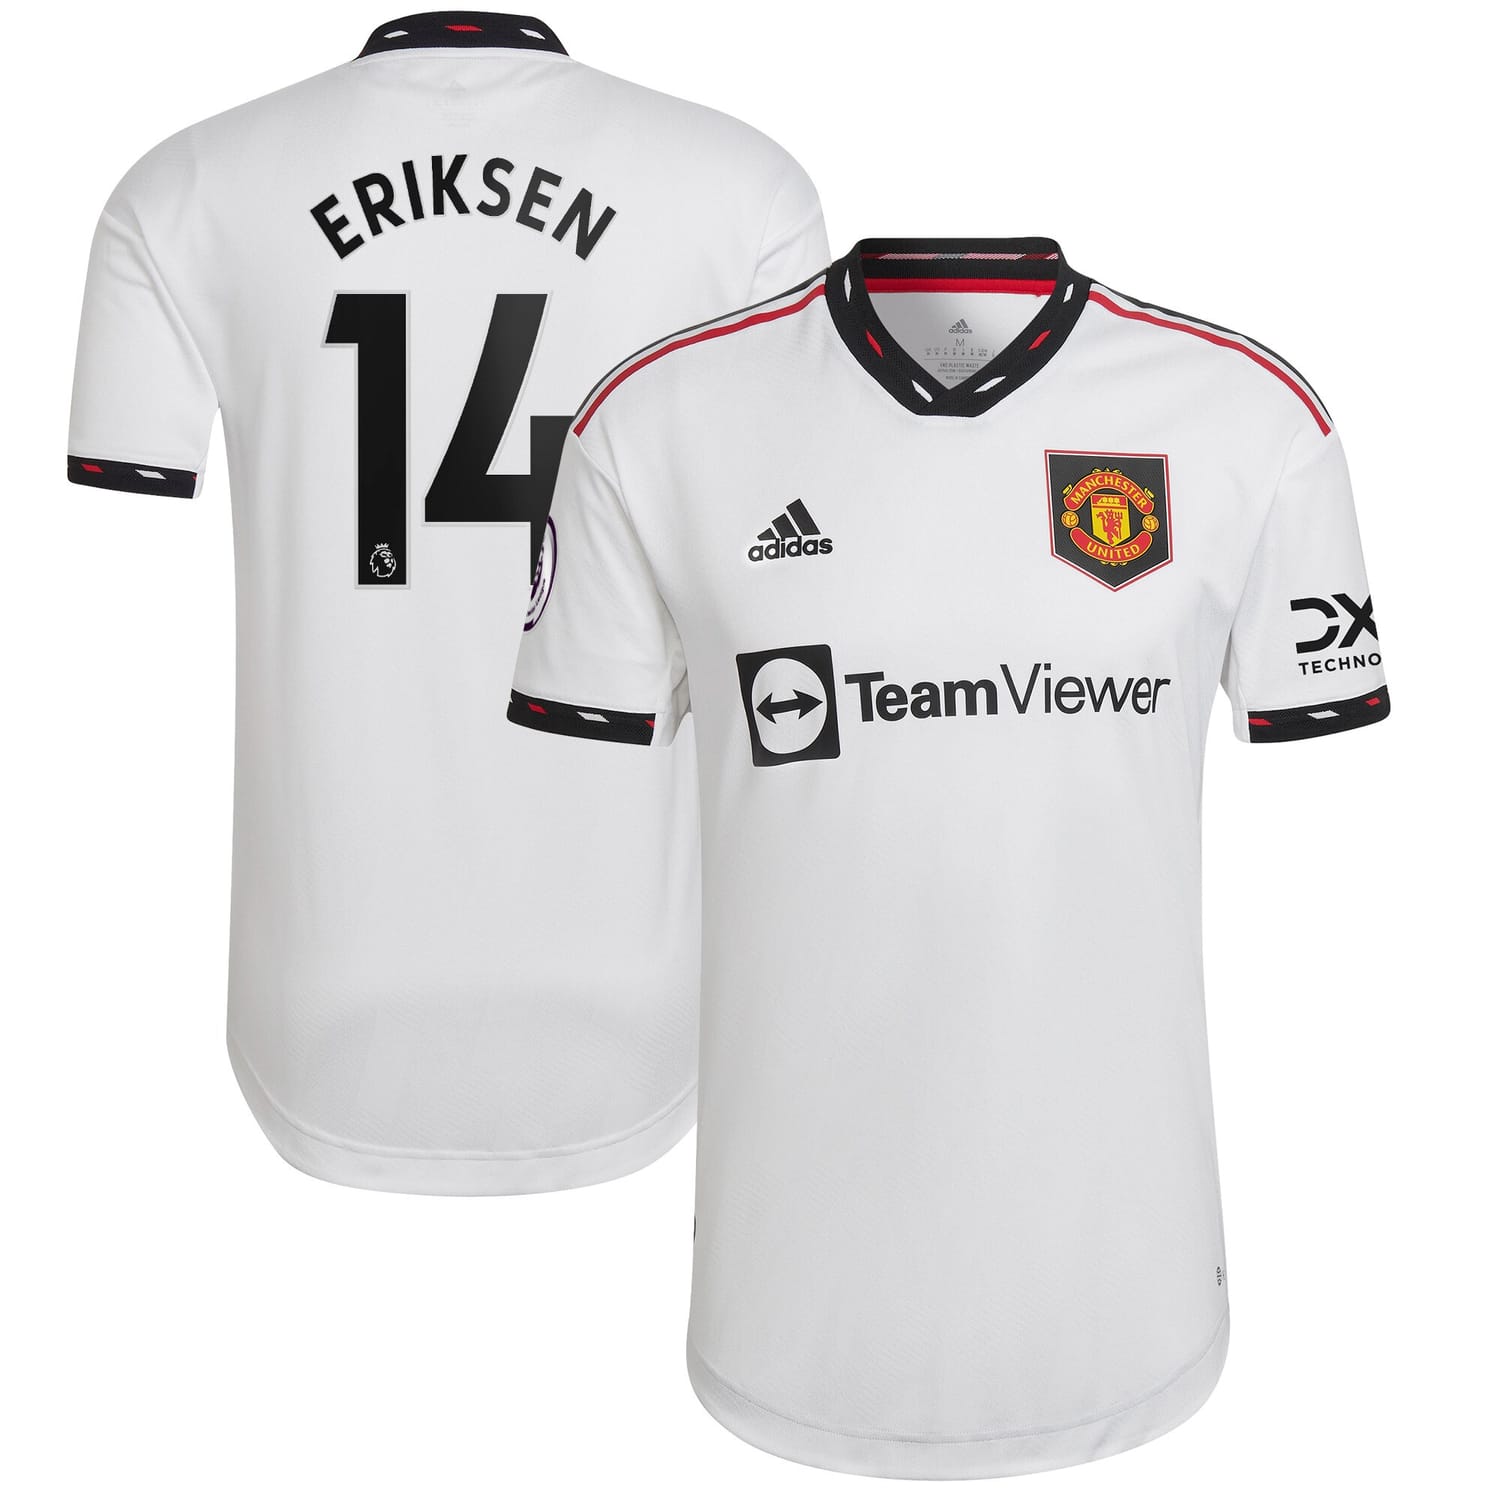 Premier League Manchester United Away Authentic Jersey Shirt White 2022-23 player Christian Eriksen printing for Men